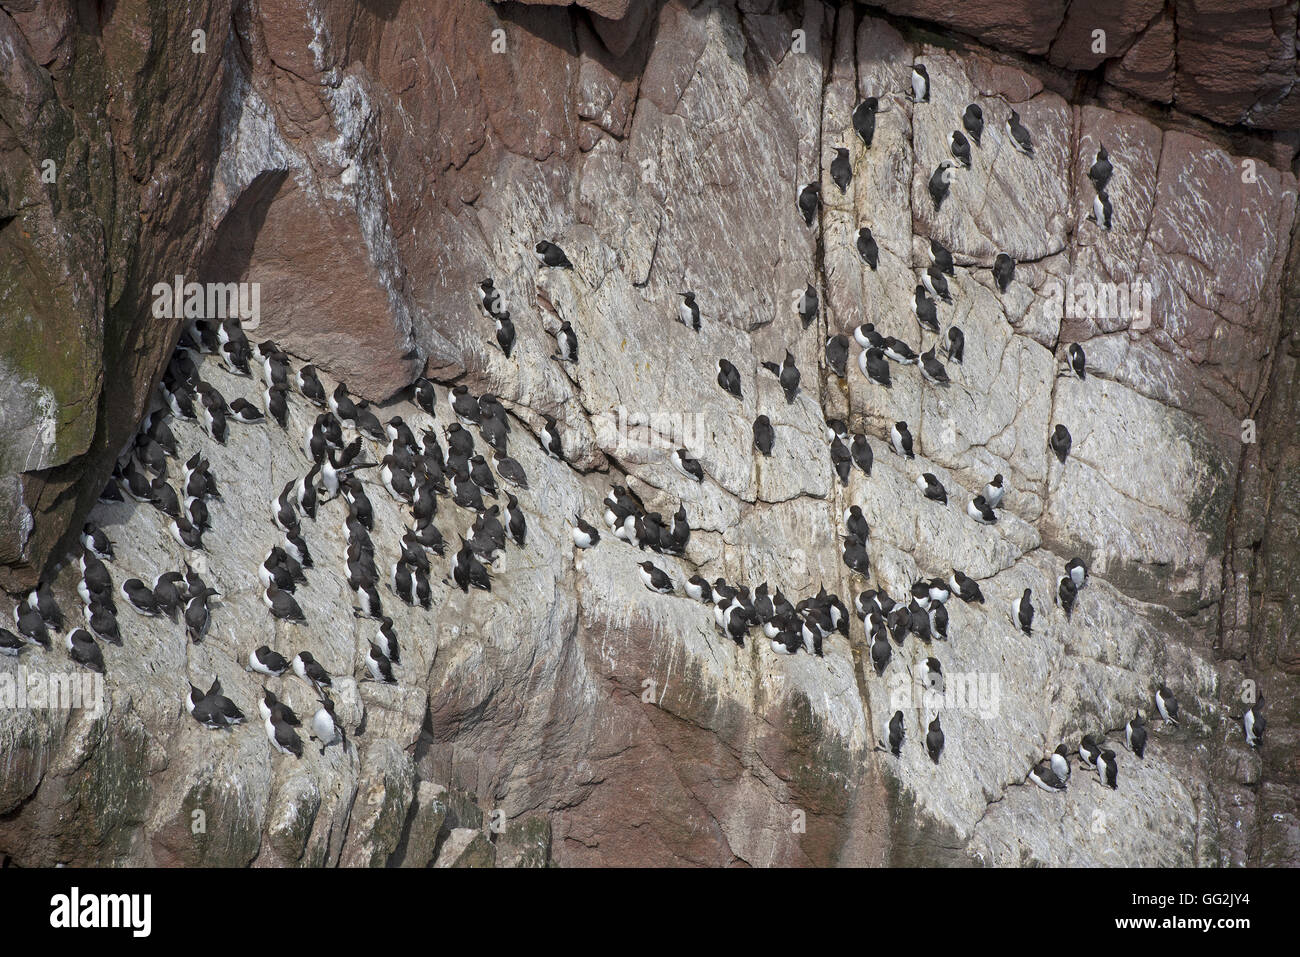 Colony of nesting seabirds, Common Guillemots Cling on to the Sea Cliffs near Peterhead, Aberdeenshire. SCO 11,116. Stock Photo